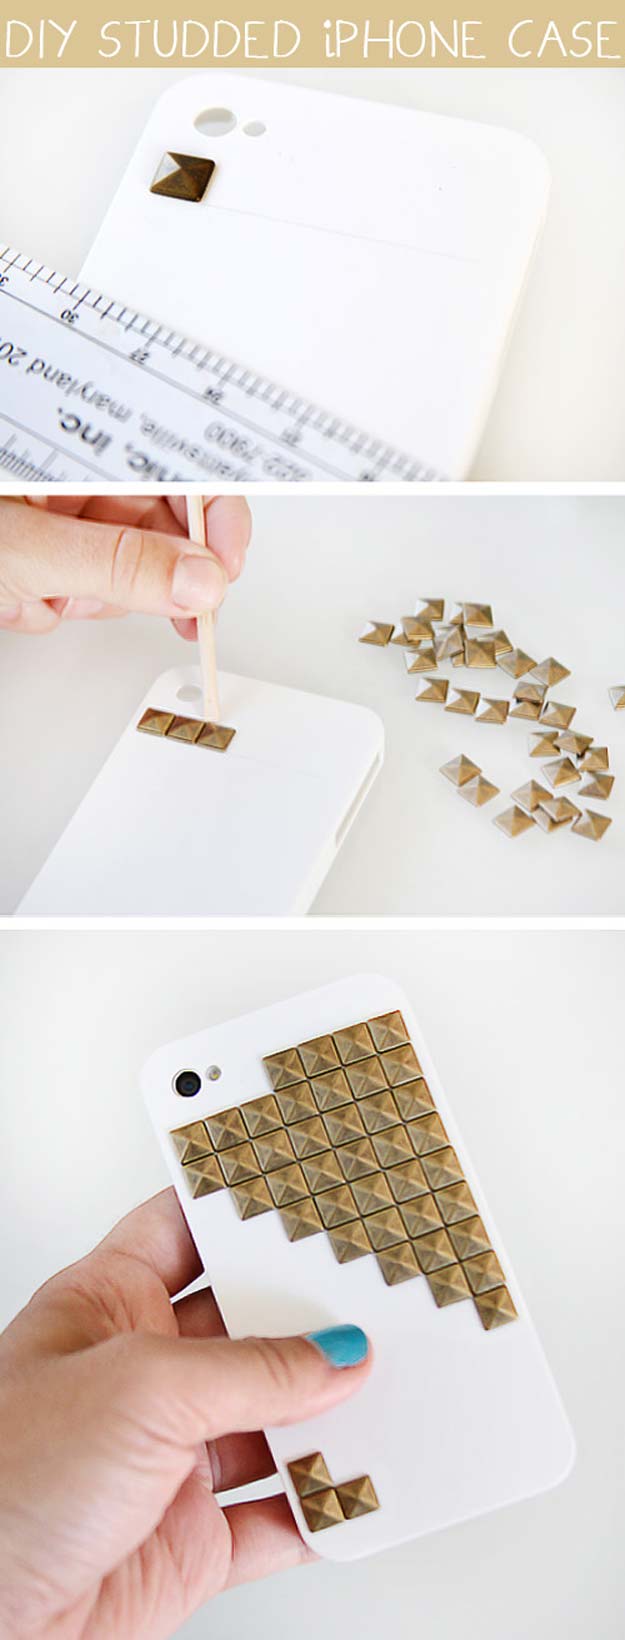 DIY iPhone Case Makeovers - Studded iPhone Case - Easy DIY Projects and Handmade Crafts Tutorial Ideas You Can Make To Decorate Your Phone With Glitter, Nail Polish, Sharpie, Paint, Bling, Printables and Sewing Patterns - Fun DIY Ideas for Women, Teens, Tweens and Kids